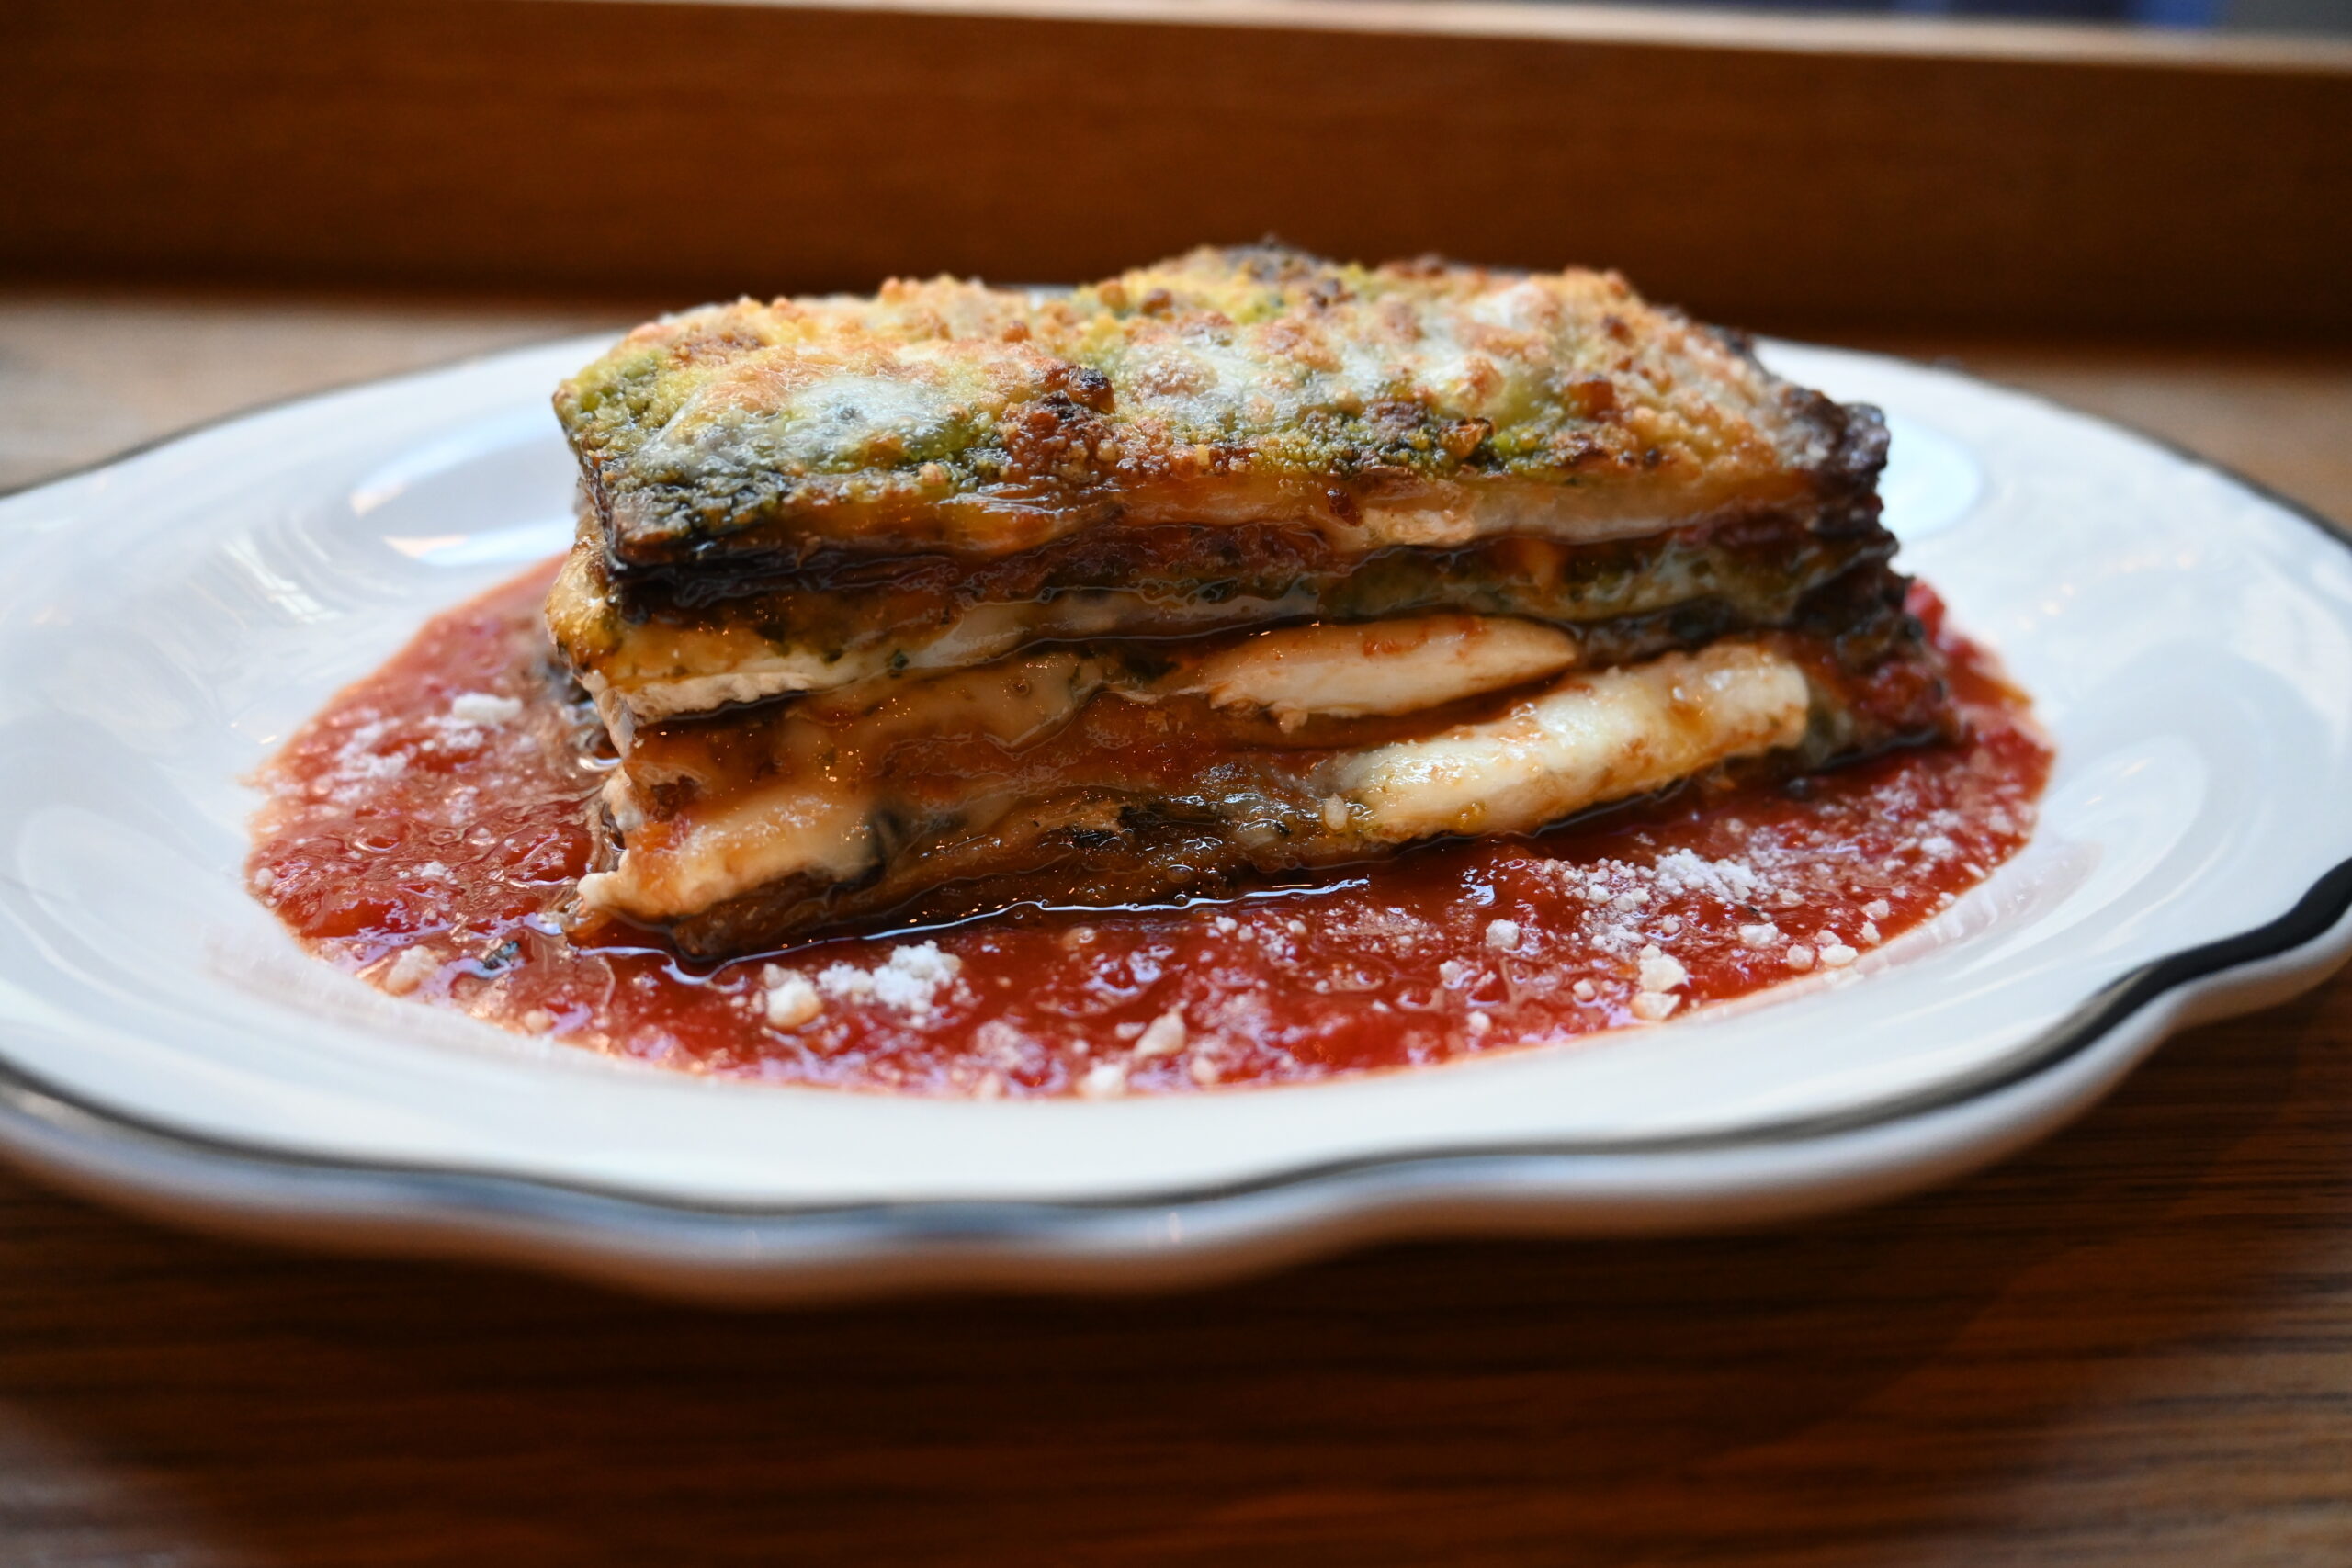 Eggplant Parmesan at Astro’s Pizza in Amagansett. COURTESY ASTRO'S PIZZA